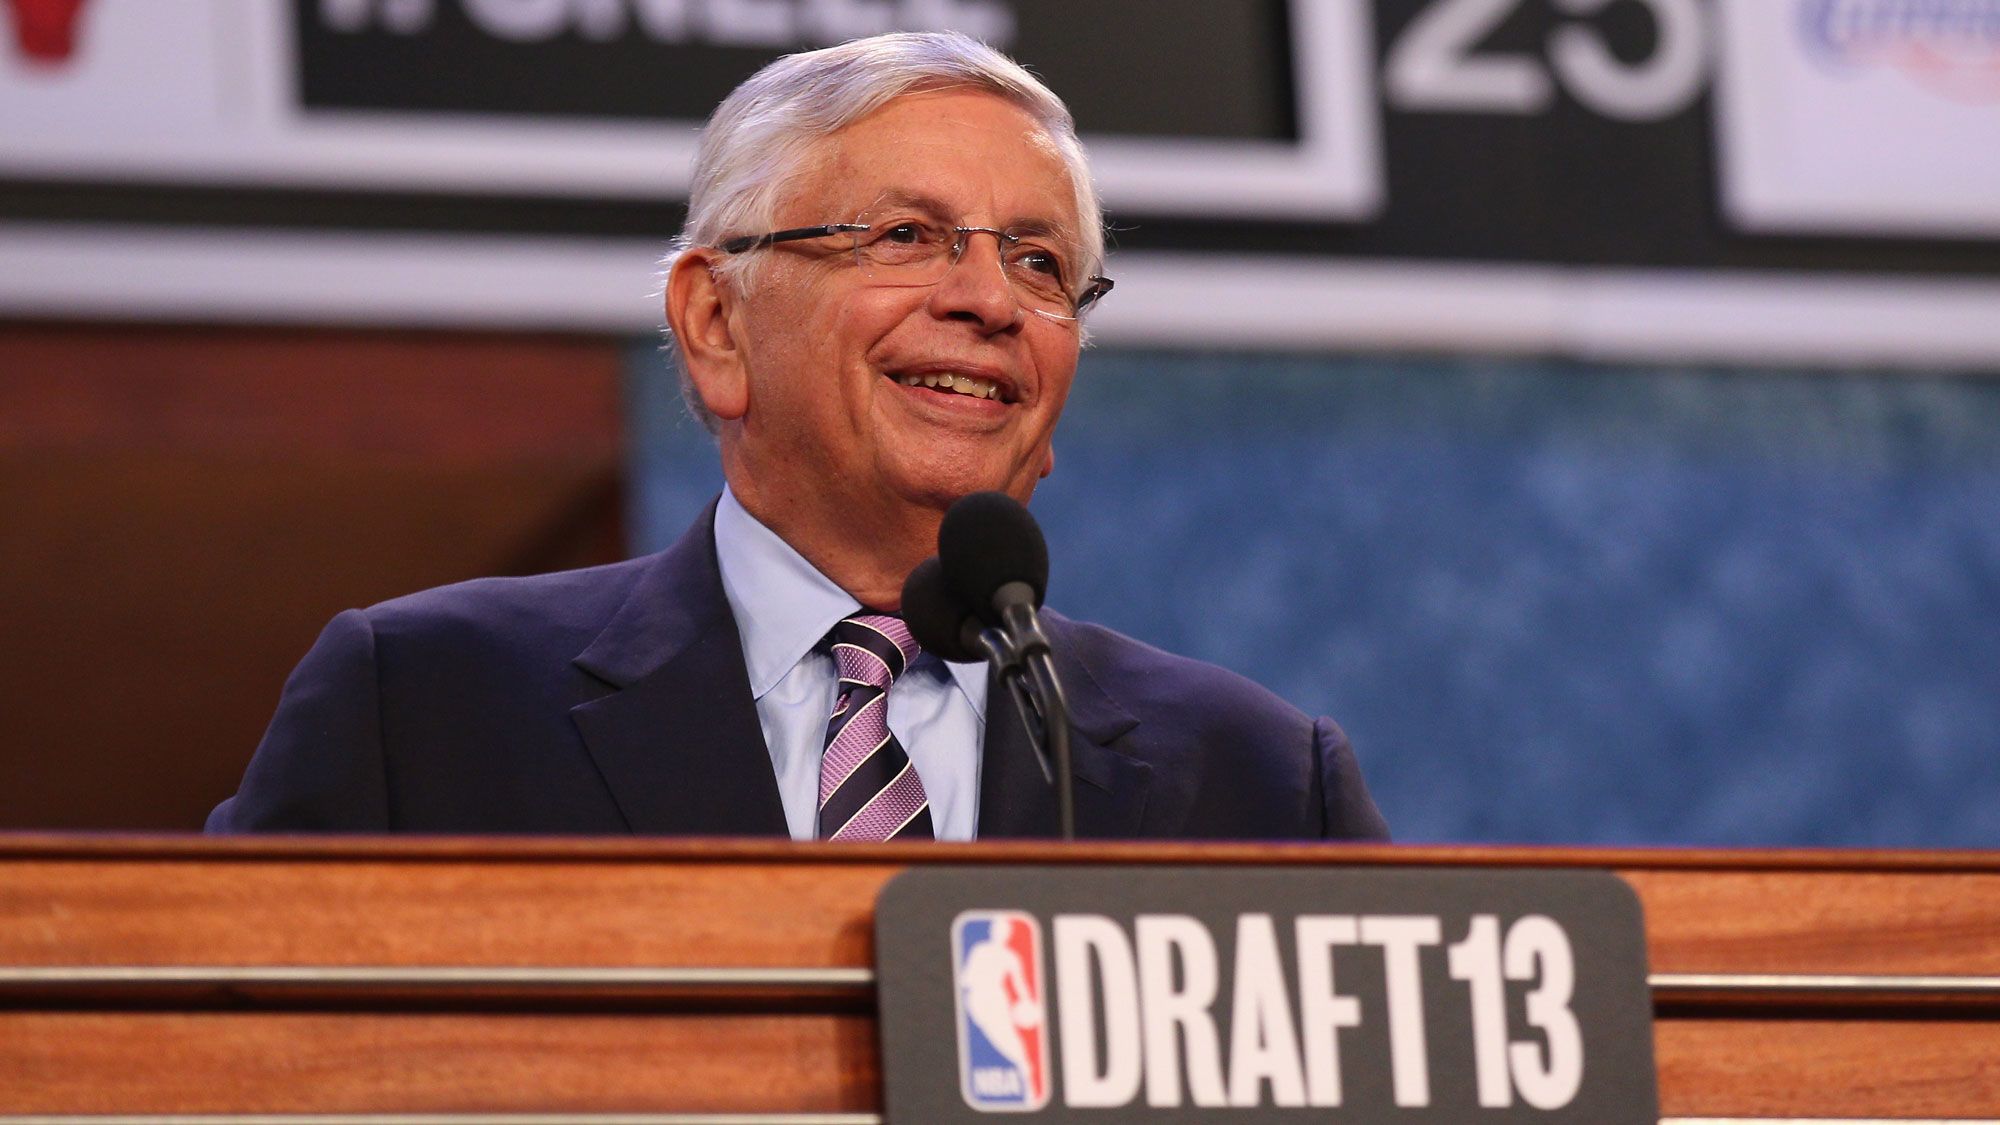 David Stern death: former NBA commissioner dies at 77, cause of